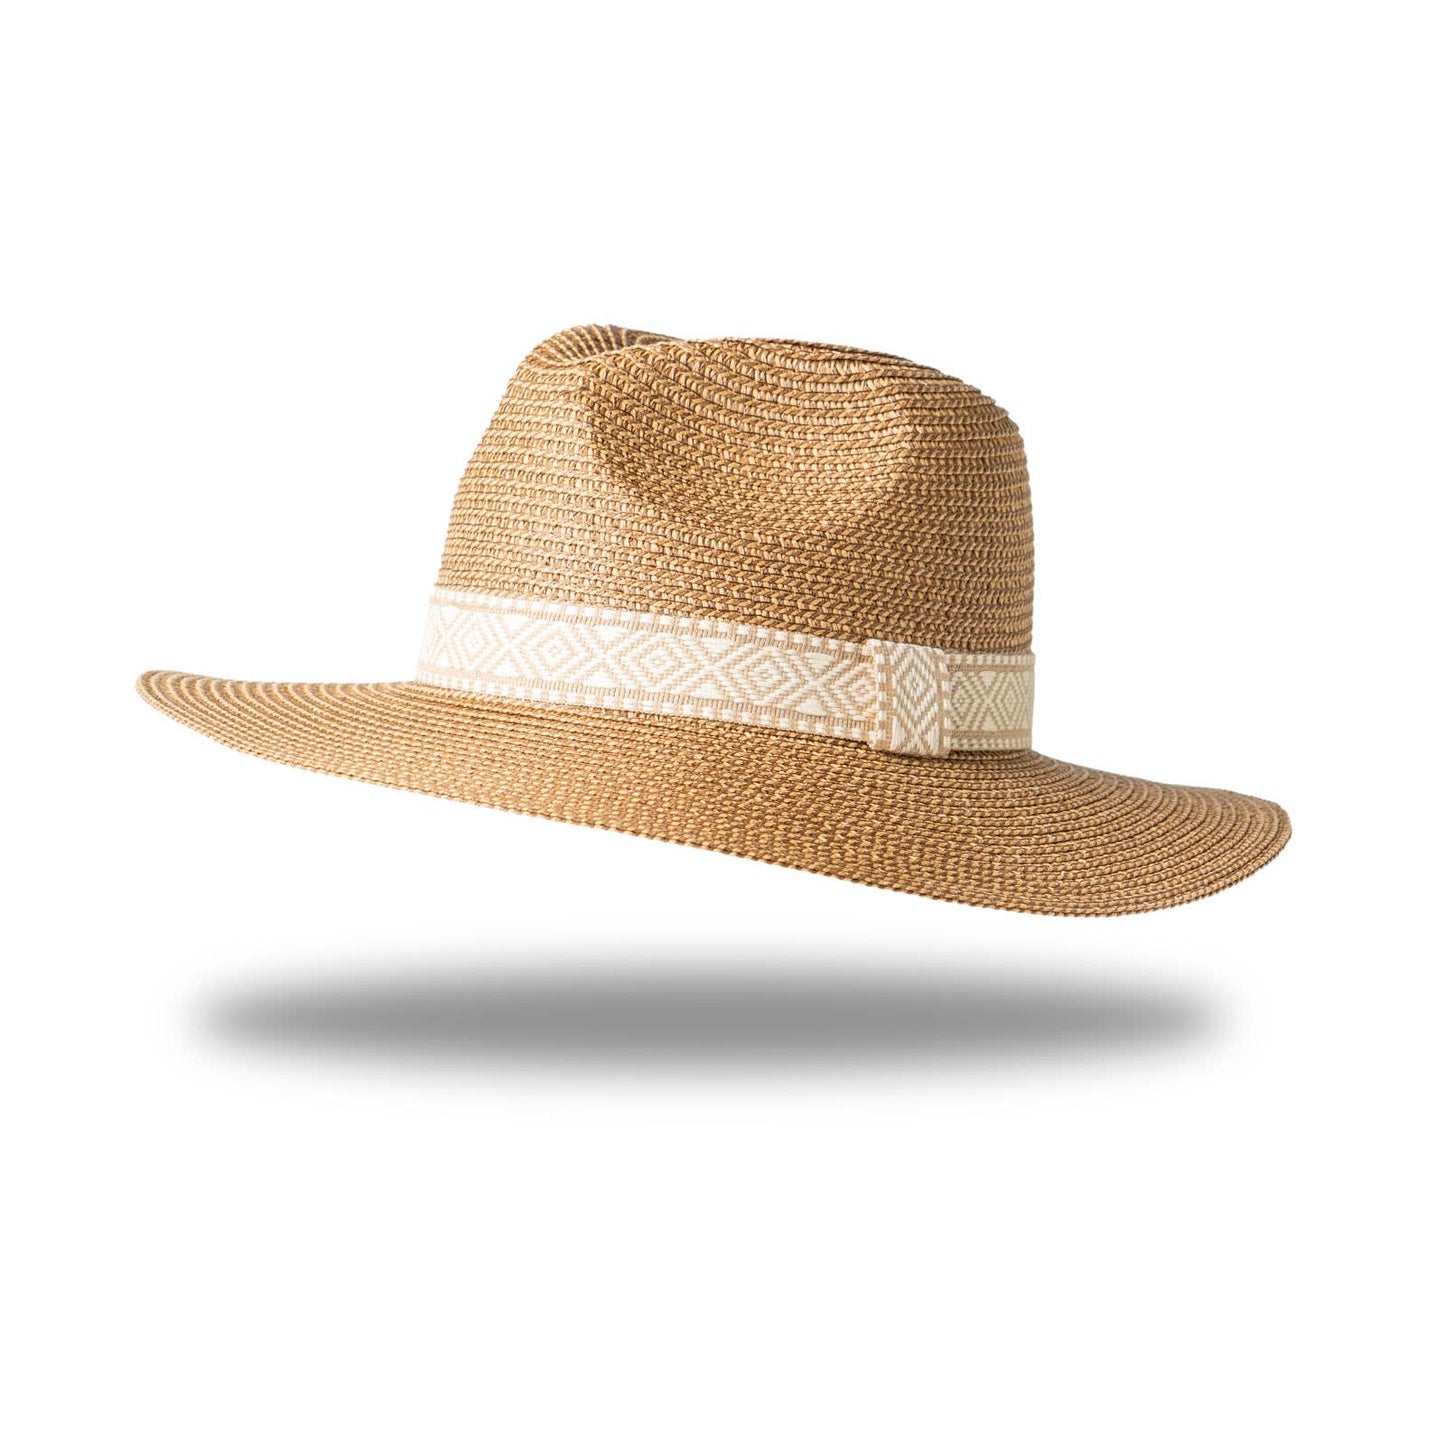 Panama Hat Open Stock - Chestnut Hats    - Chickie Collective